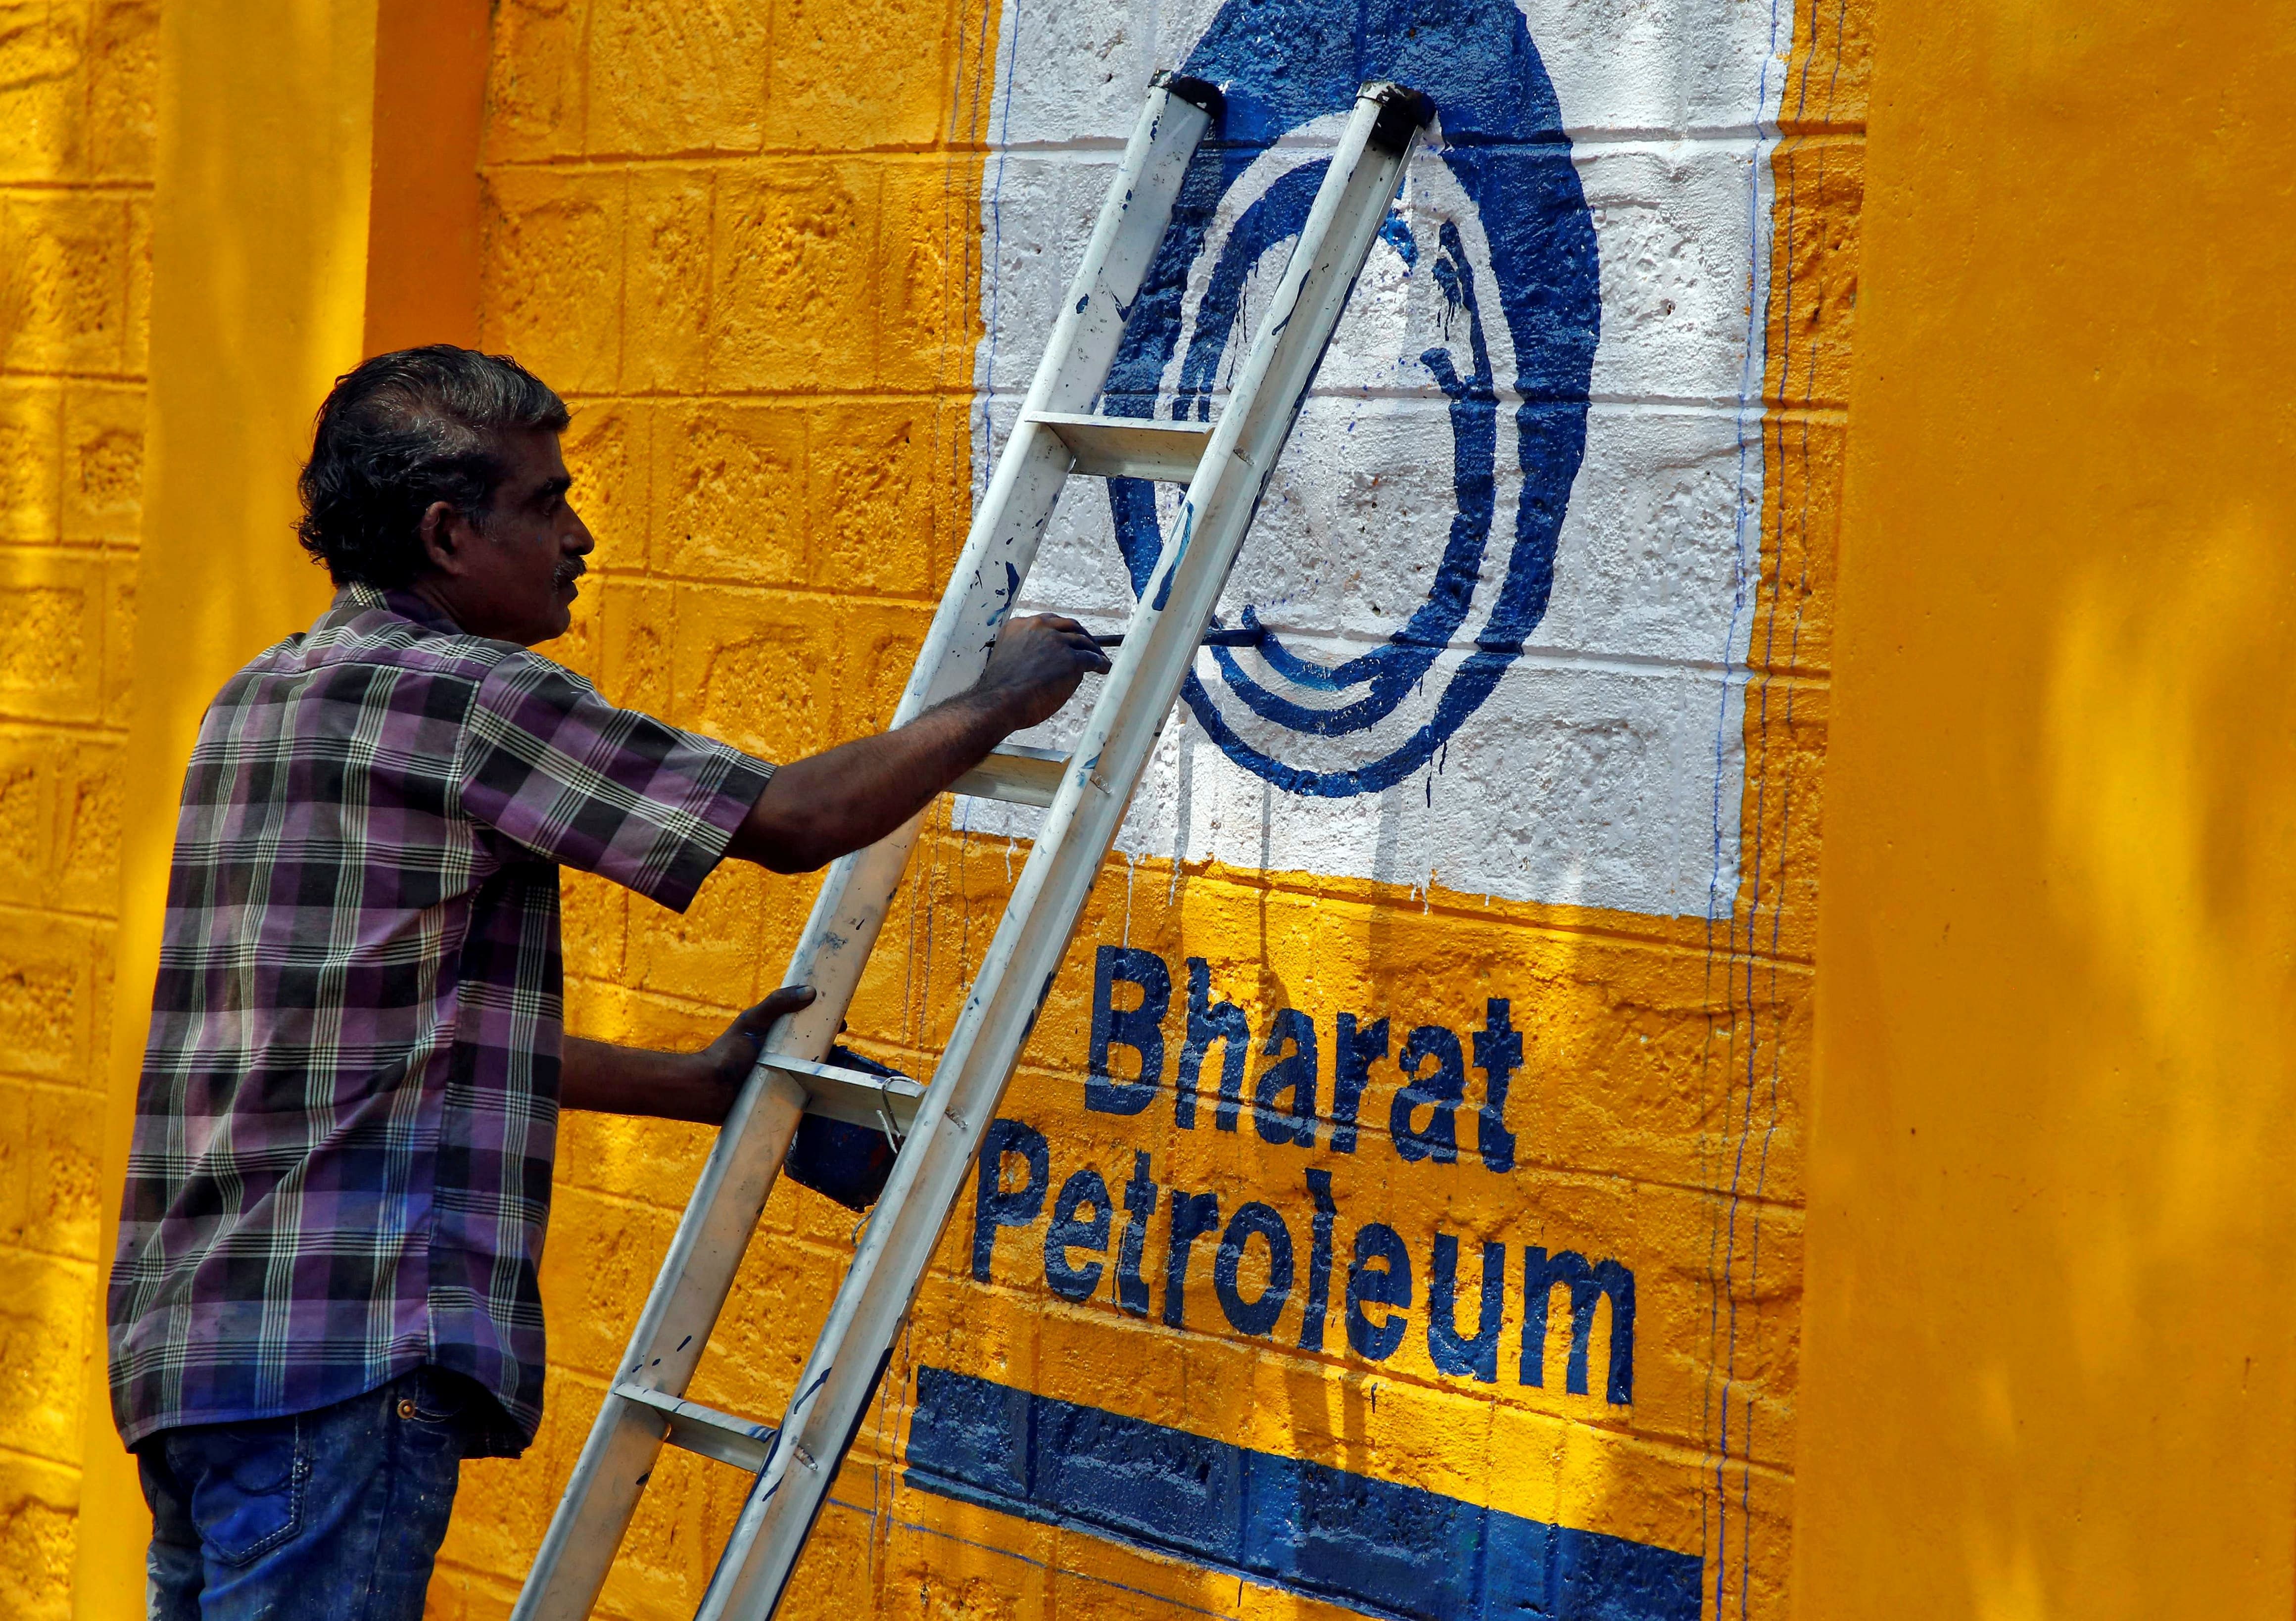 The company distributes 21 per cent of petroleum products consumed in the country by volume as of March this year and has more than a fifth of the 250 aviation fuel stations in the country. (Credit: Reuters Photo)